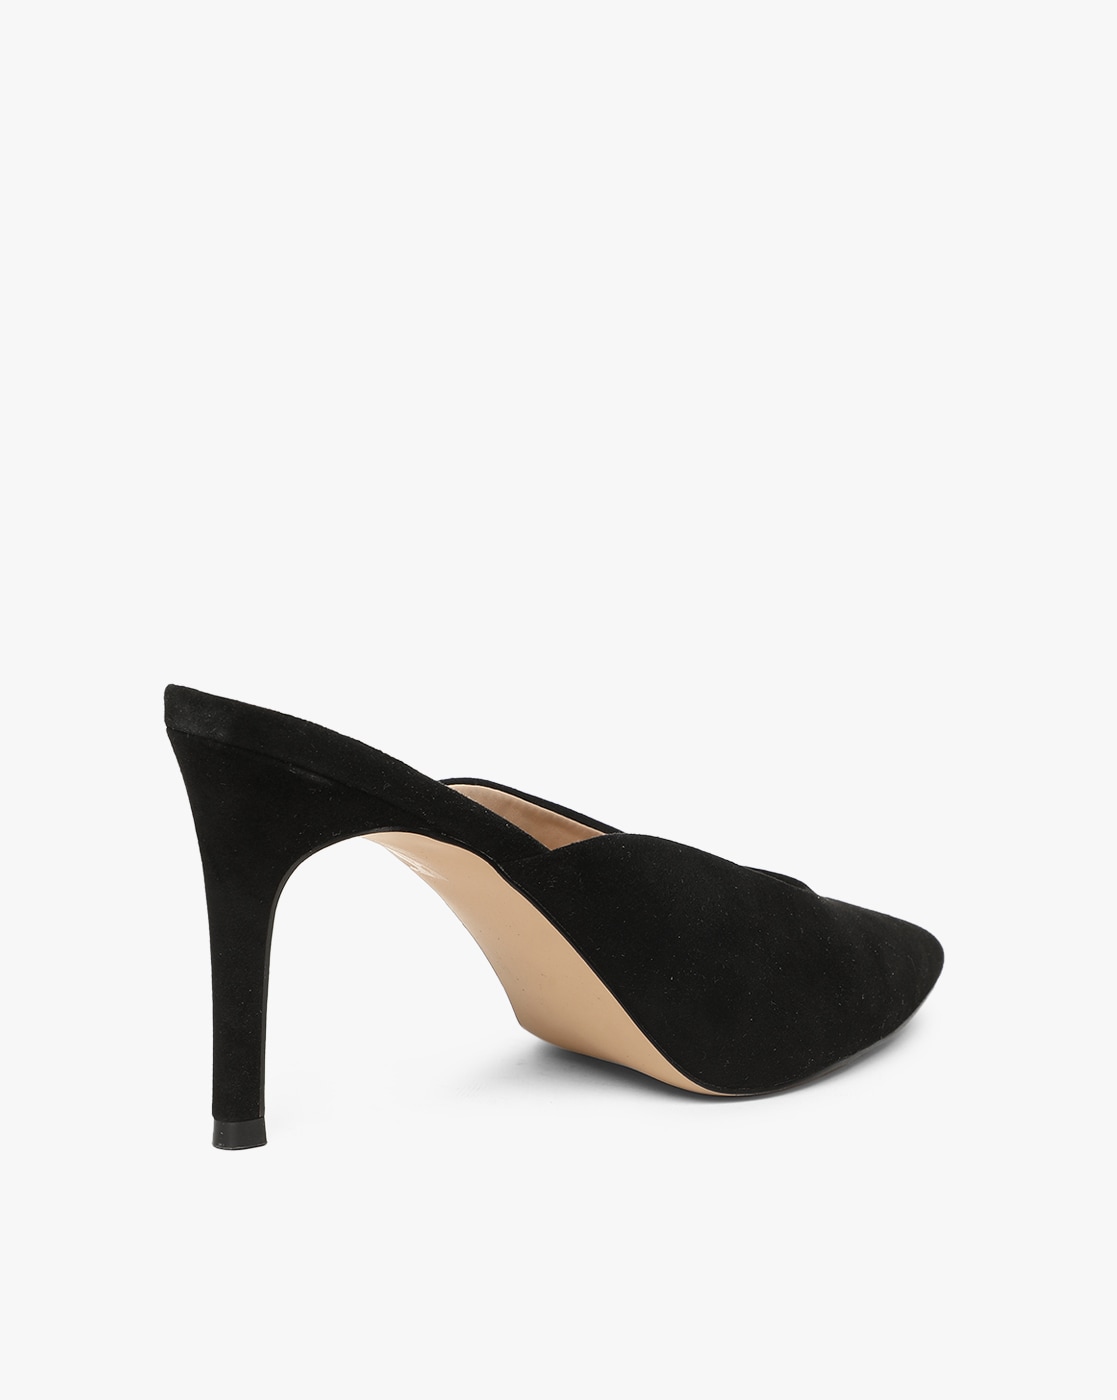 Heeled Shoes for Women by STEVE MADDEN 